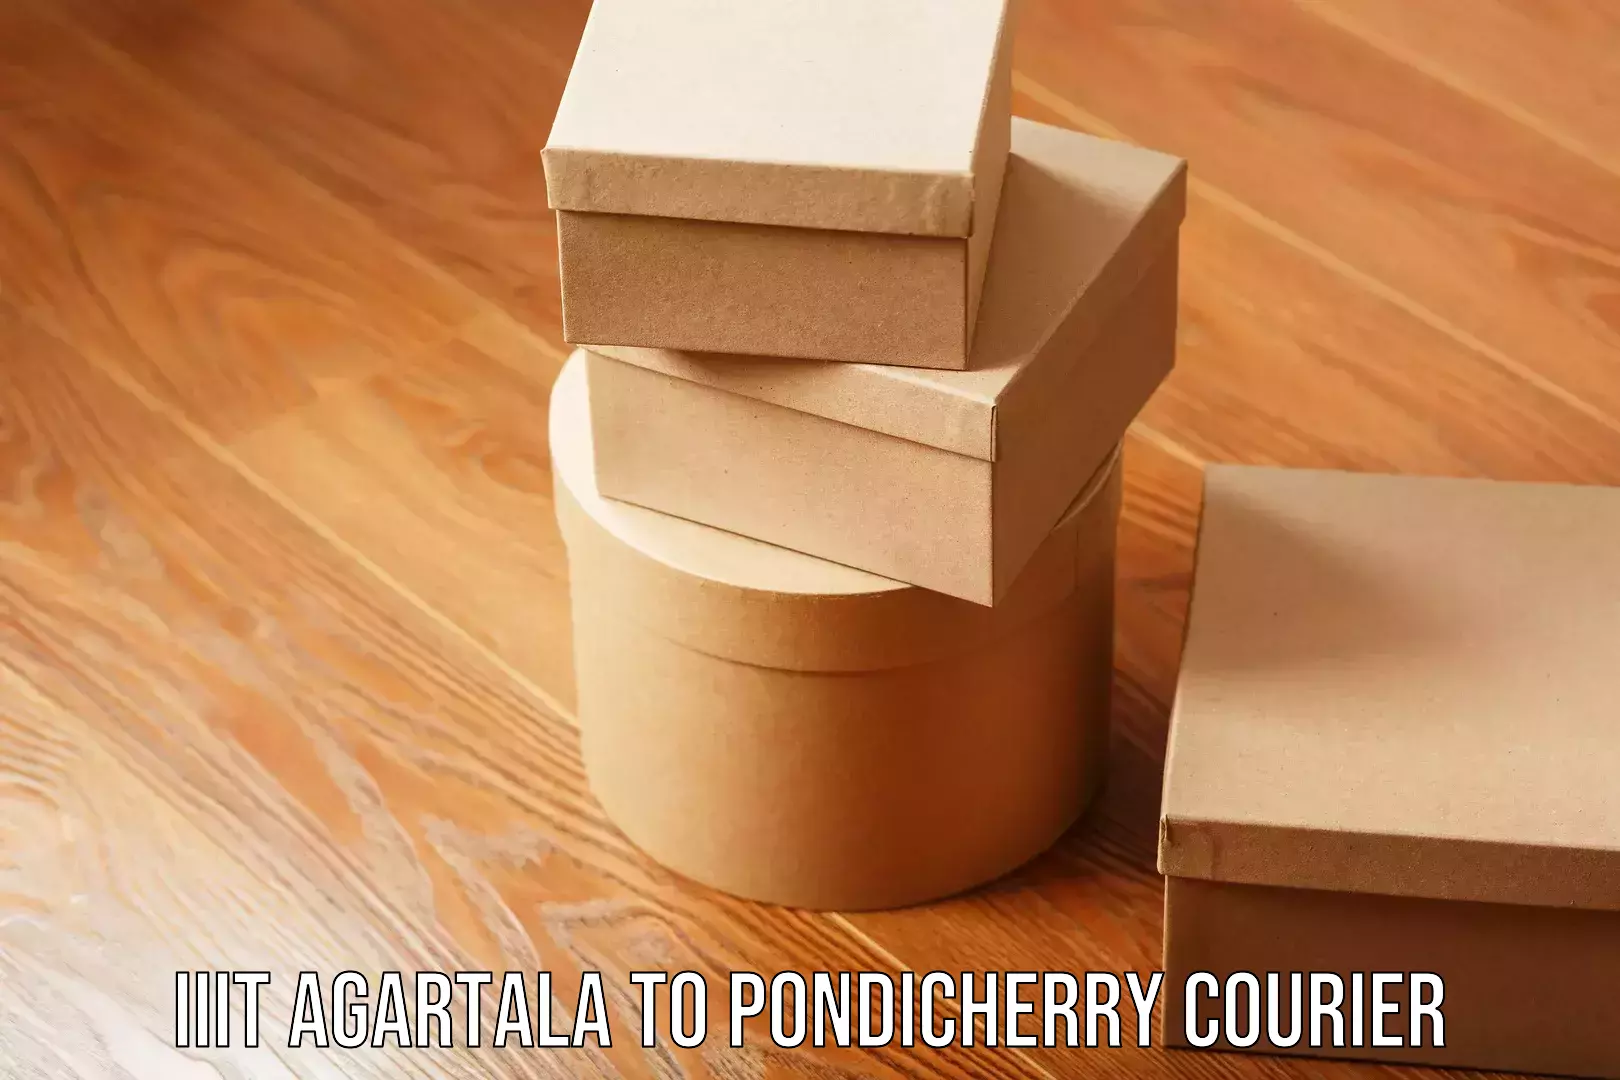 Affordable shipping solutions IIIT Agartala to Pondicherry